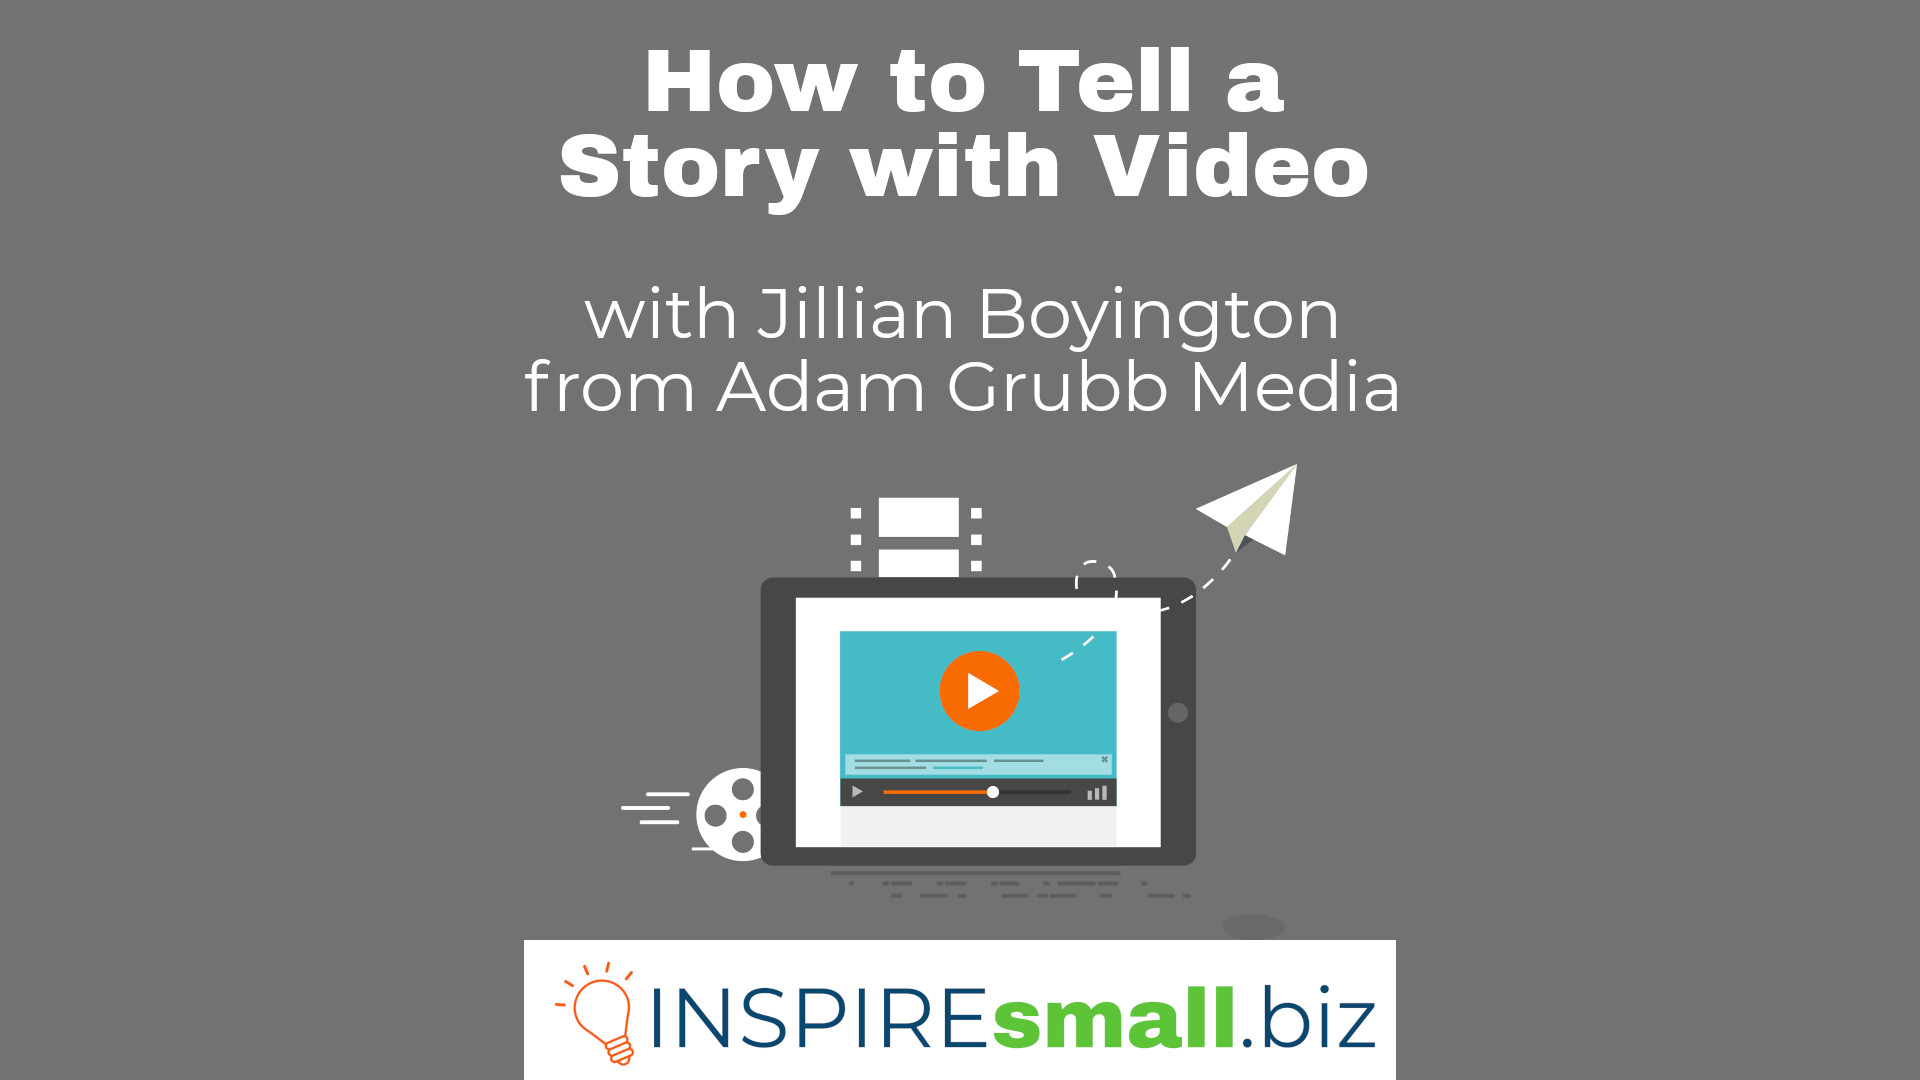 How to Tell a Story with Video with Jillian Boyington from Adam Grubb Media, hosted by INSPIREsmall.biz. There is a gray background with a screen with an orange play button over a video, behind the screen, there is a movie reel, film, and a paper airplane flying off to the right.